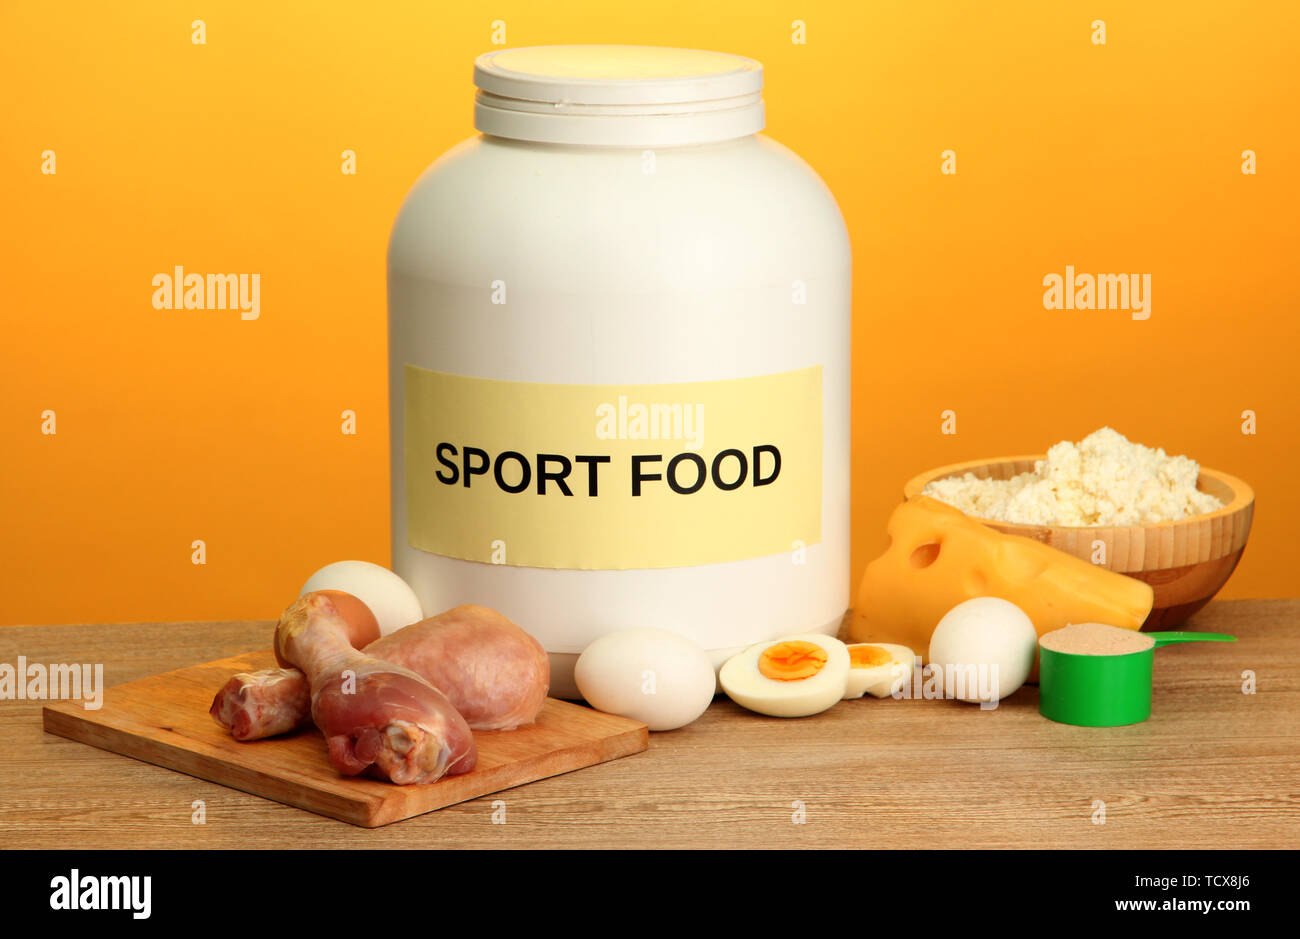 Download Jar Of Protein Powder And Food With Protein On Yellow Background Stock Photo Alamy Yellowimages Mockups